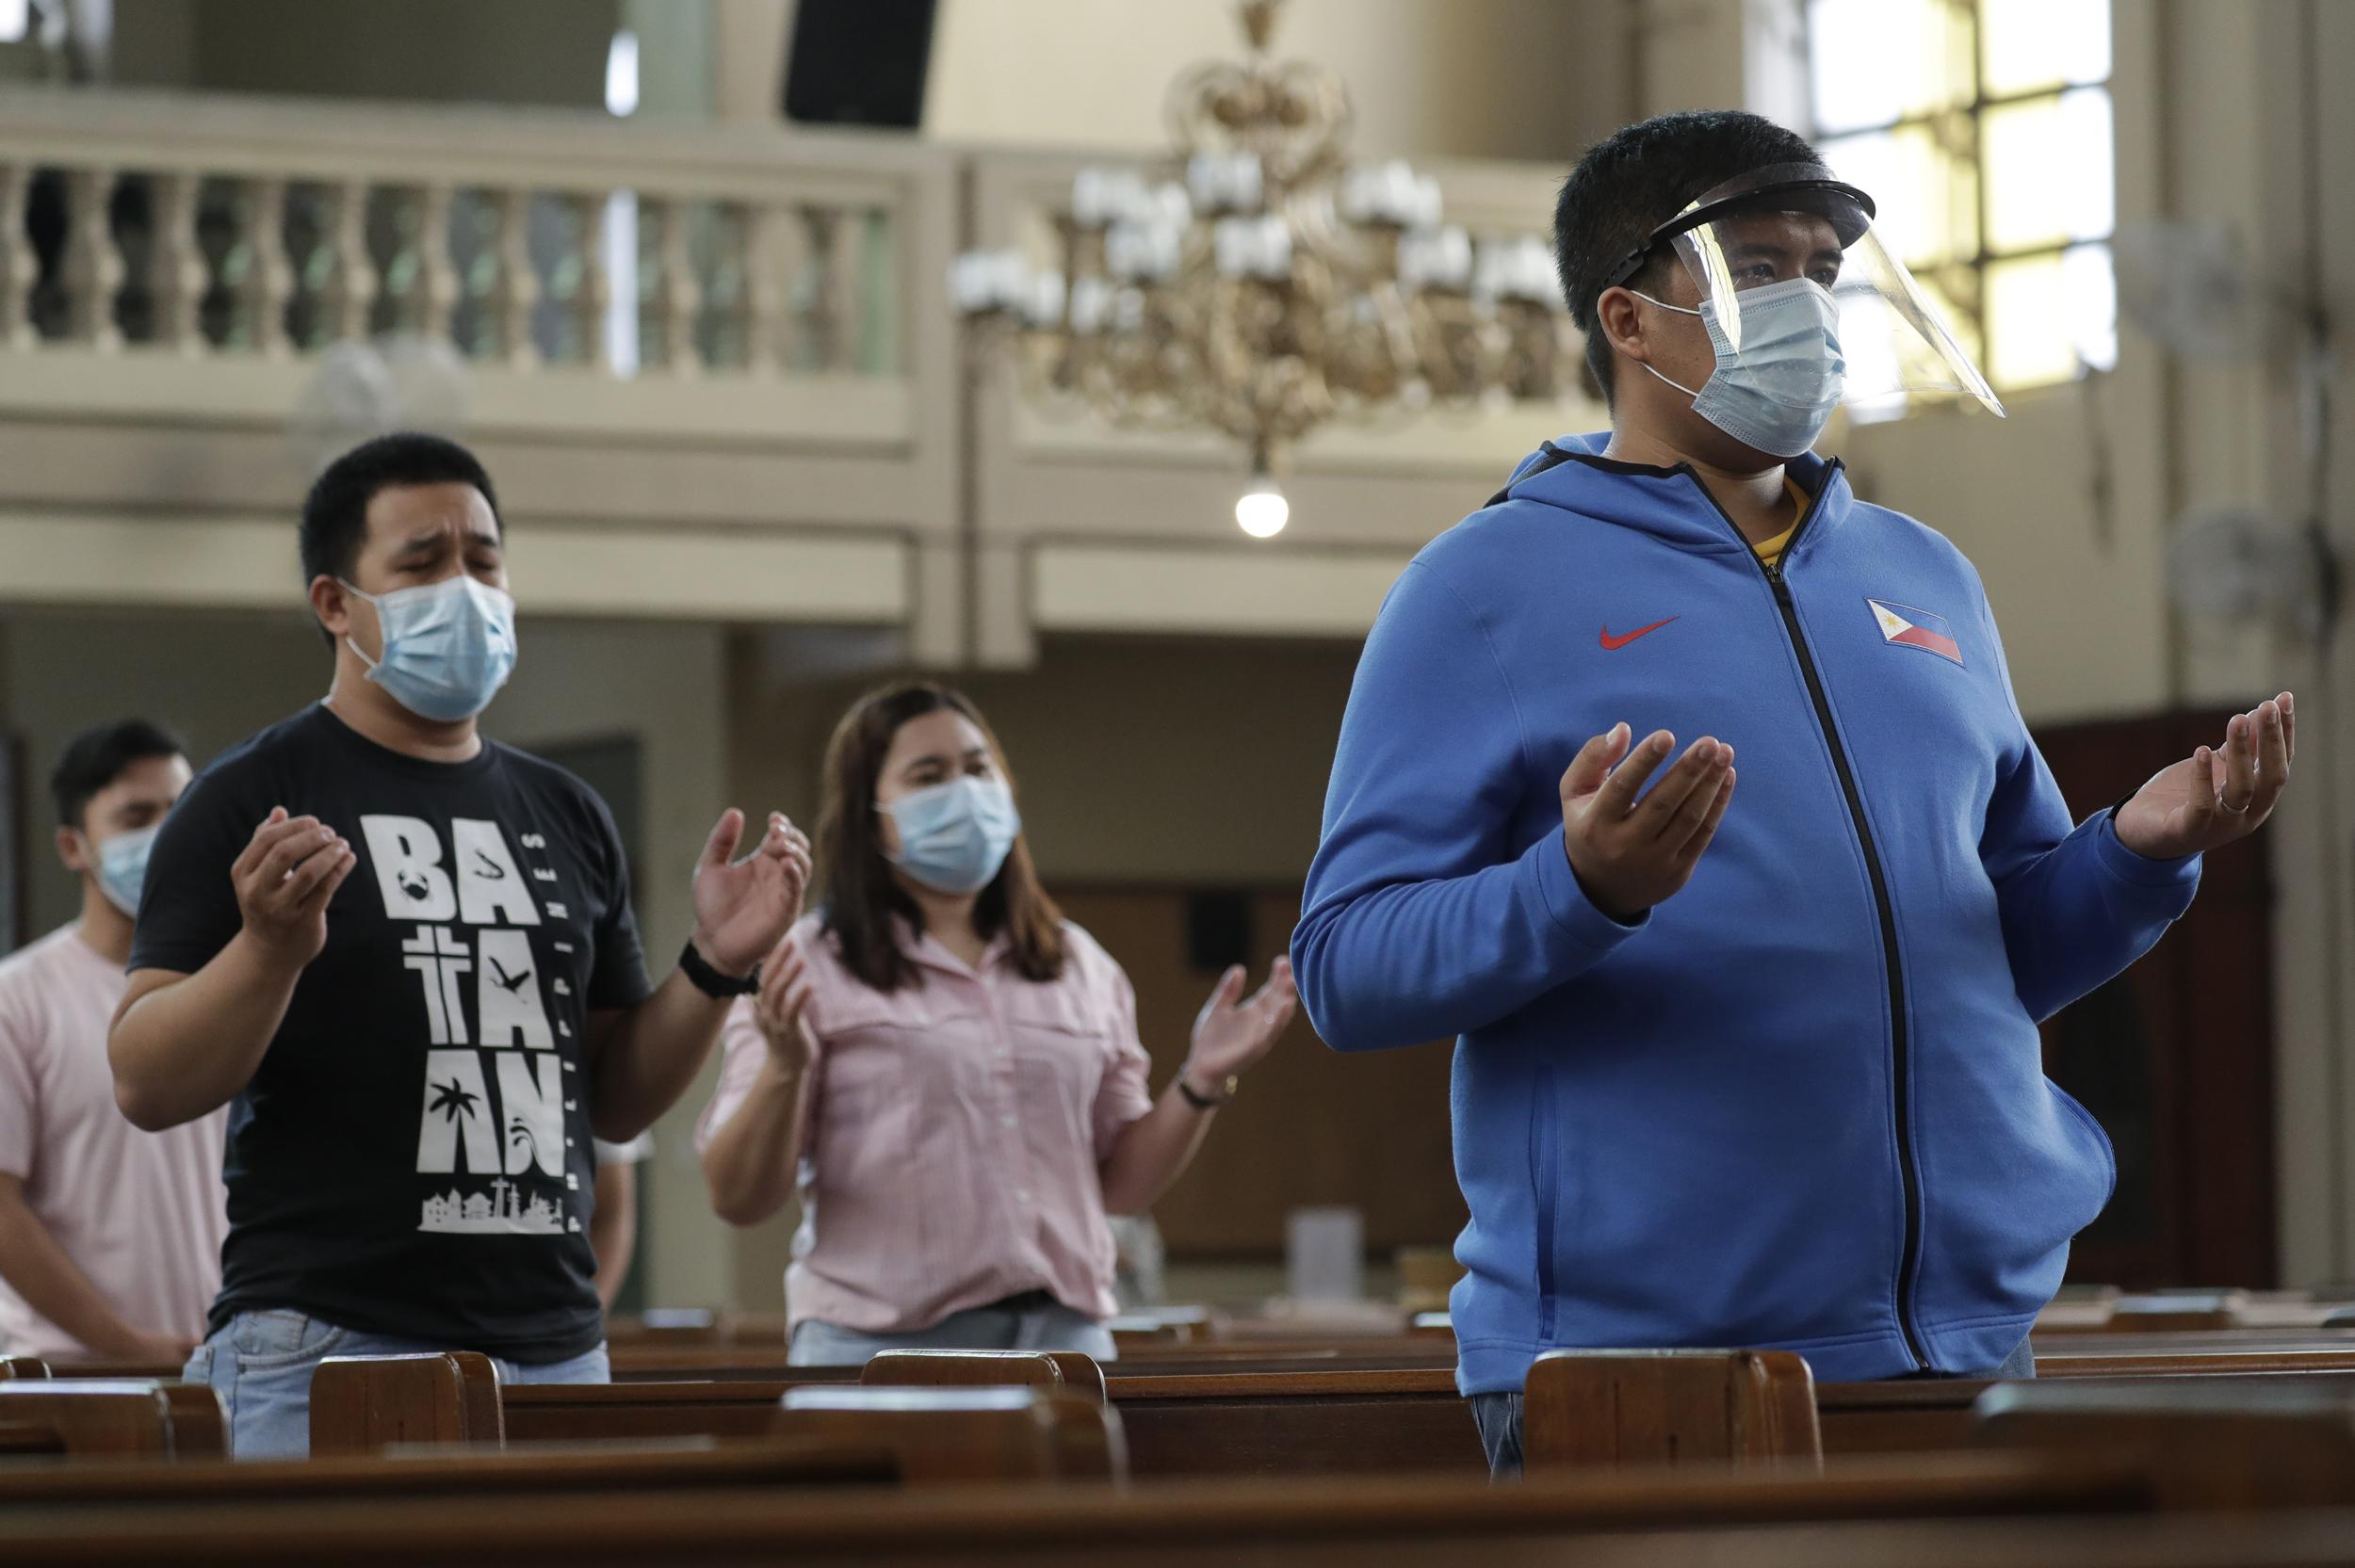 Parishioners wearing masks as a measure to prevent the spread of Covid-19 pray during a Mass at the Our Lady of Consolation Parish in the Philippines